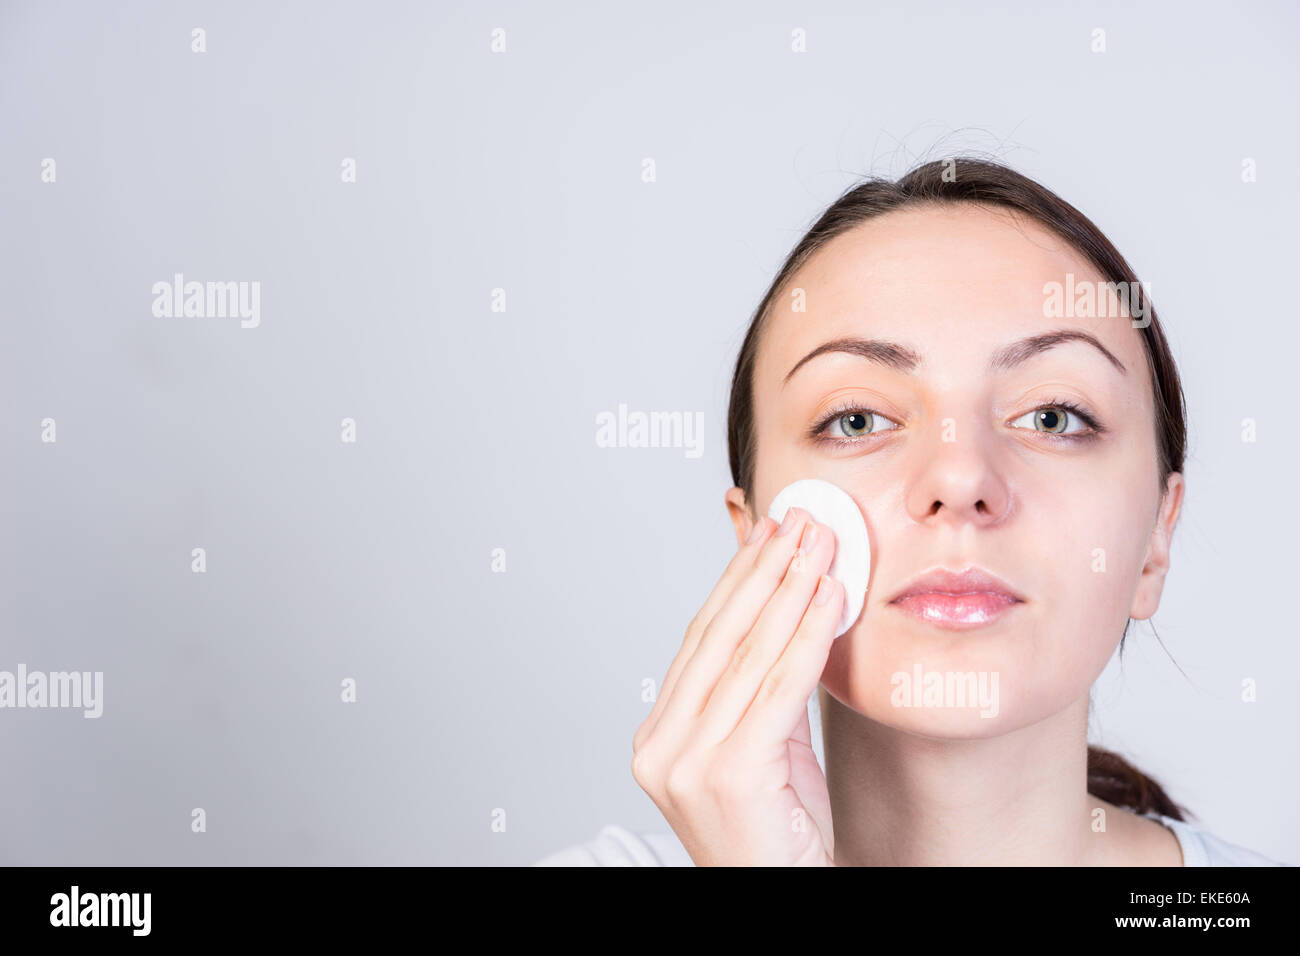 Close up Pretty Young Woman Scrubbing her Face with Astringent While Looking at the Camera. Captured in Studio on a Gray Background with Copy Space.. Stock Photo